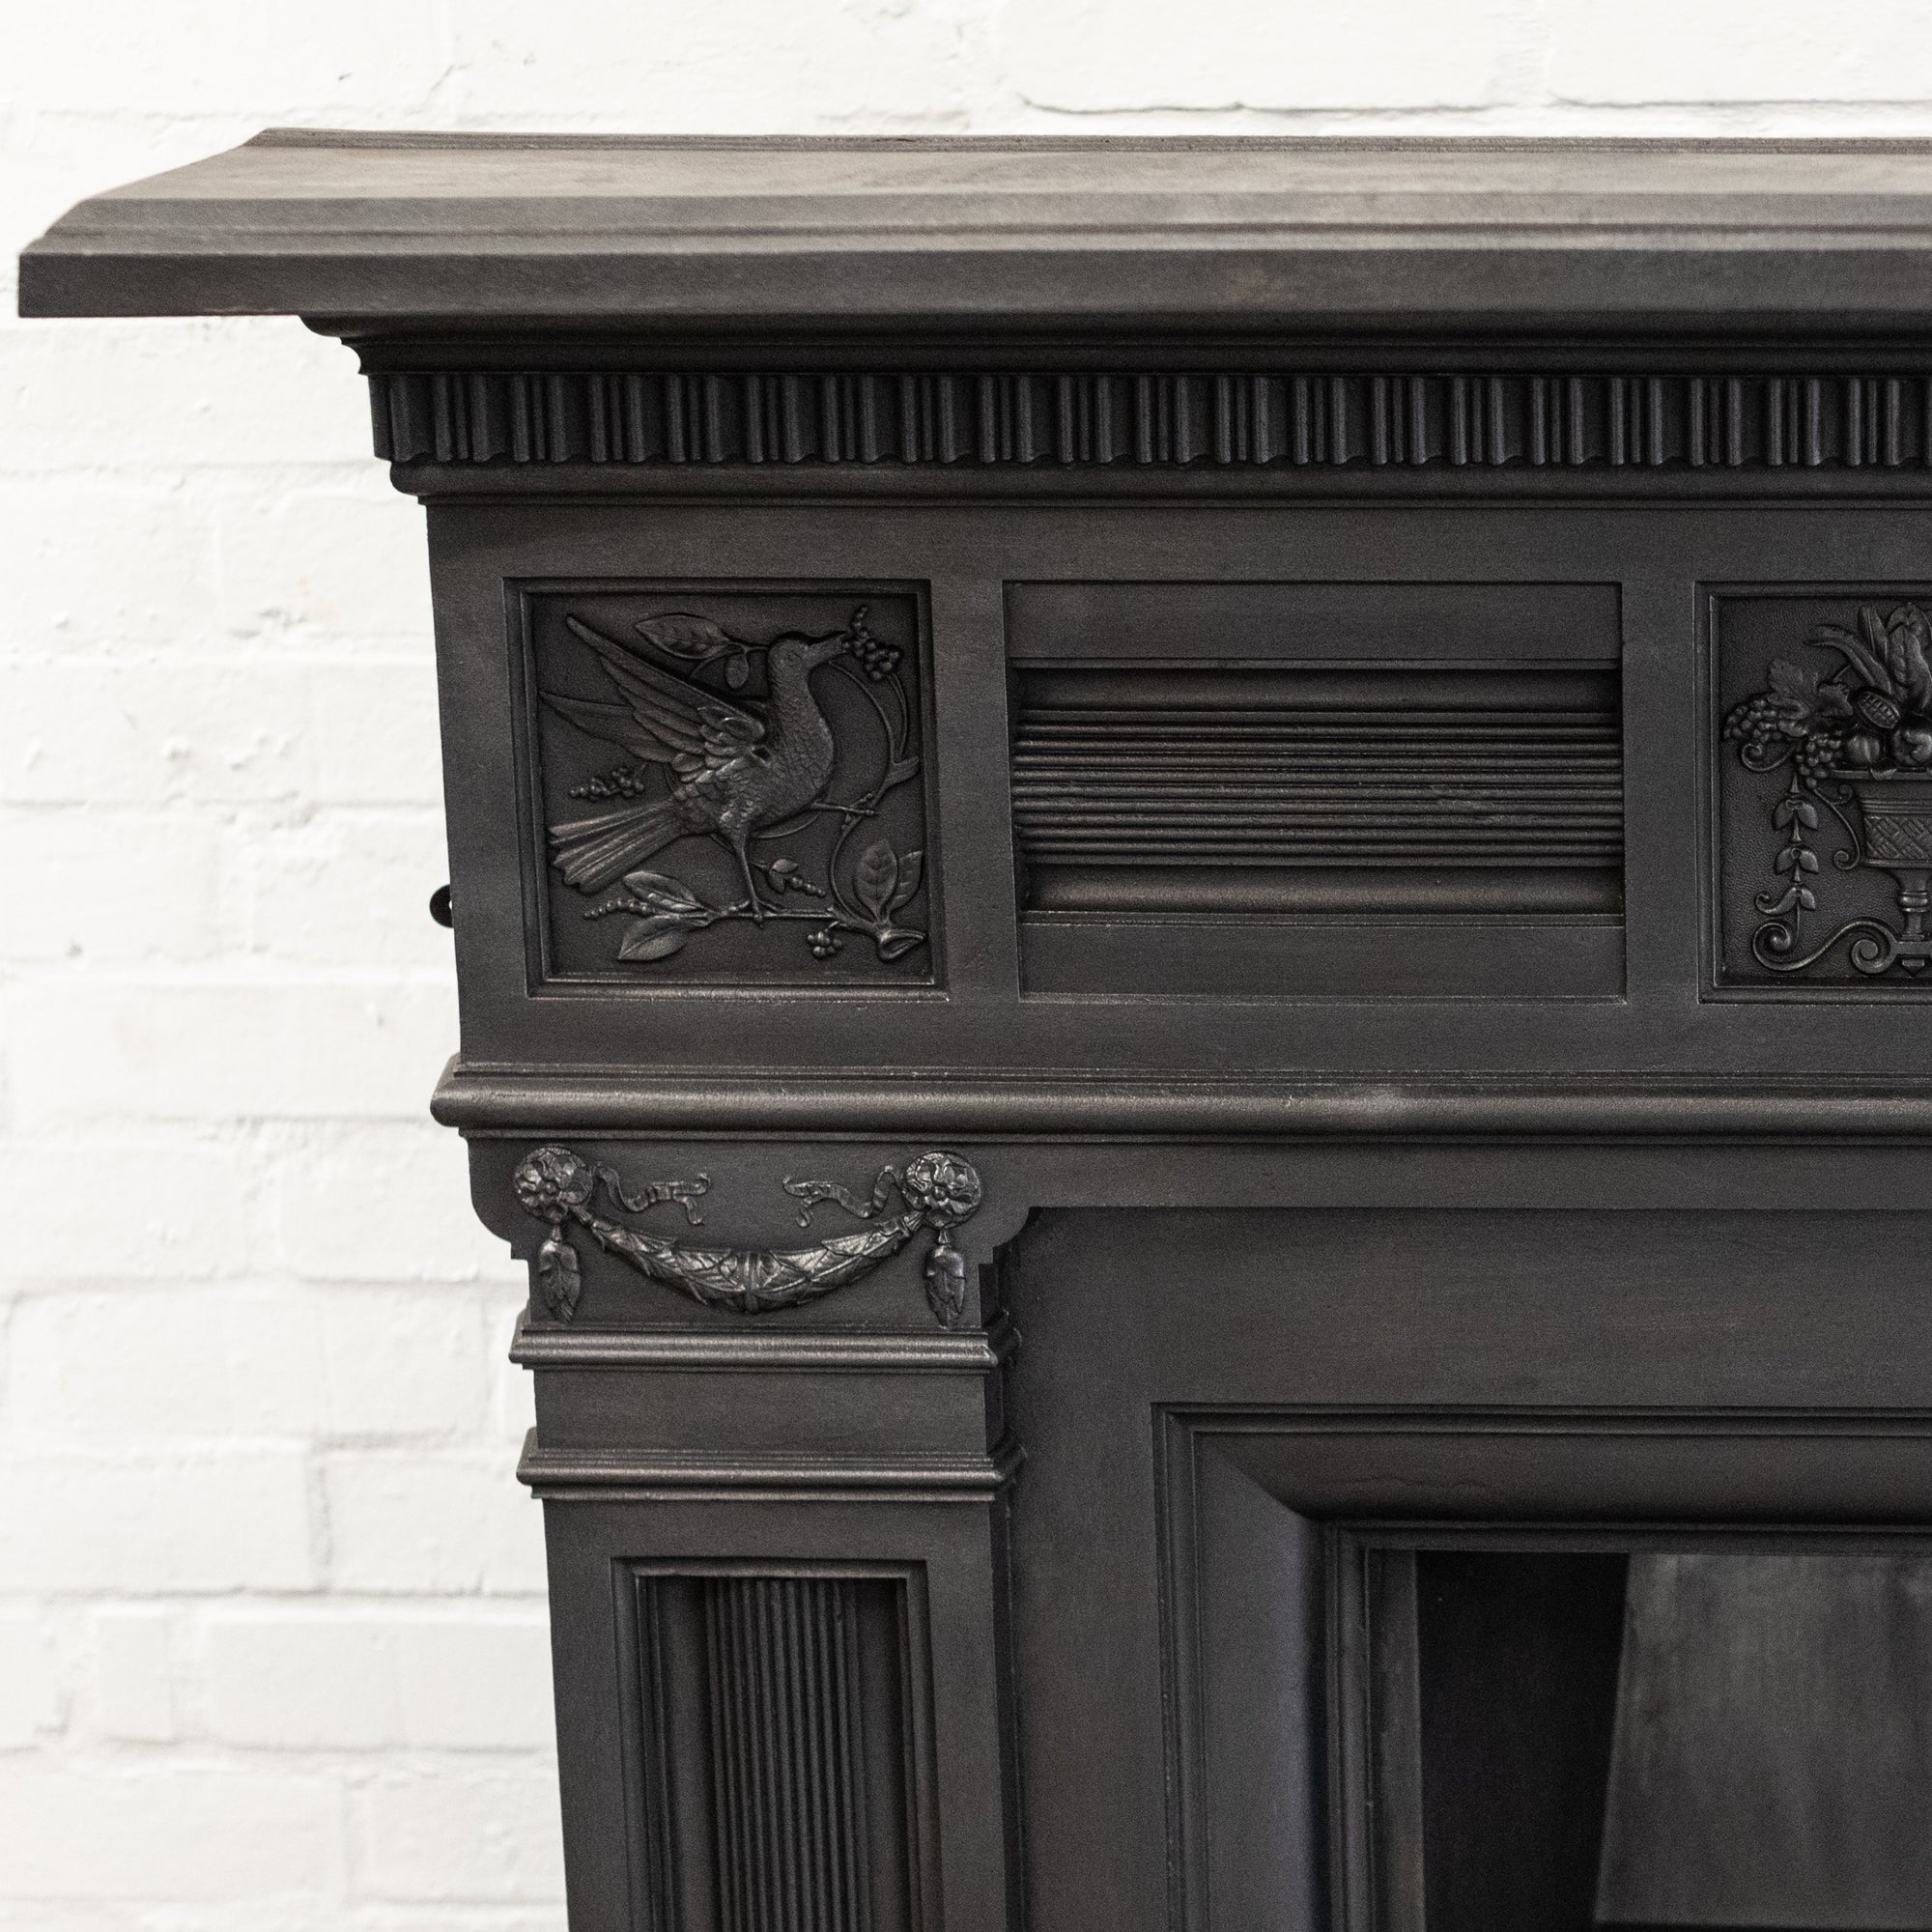 Antique Cast Iron Combination Fireplace with Florals and Birds | The Architectural Forum